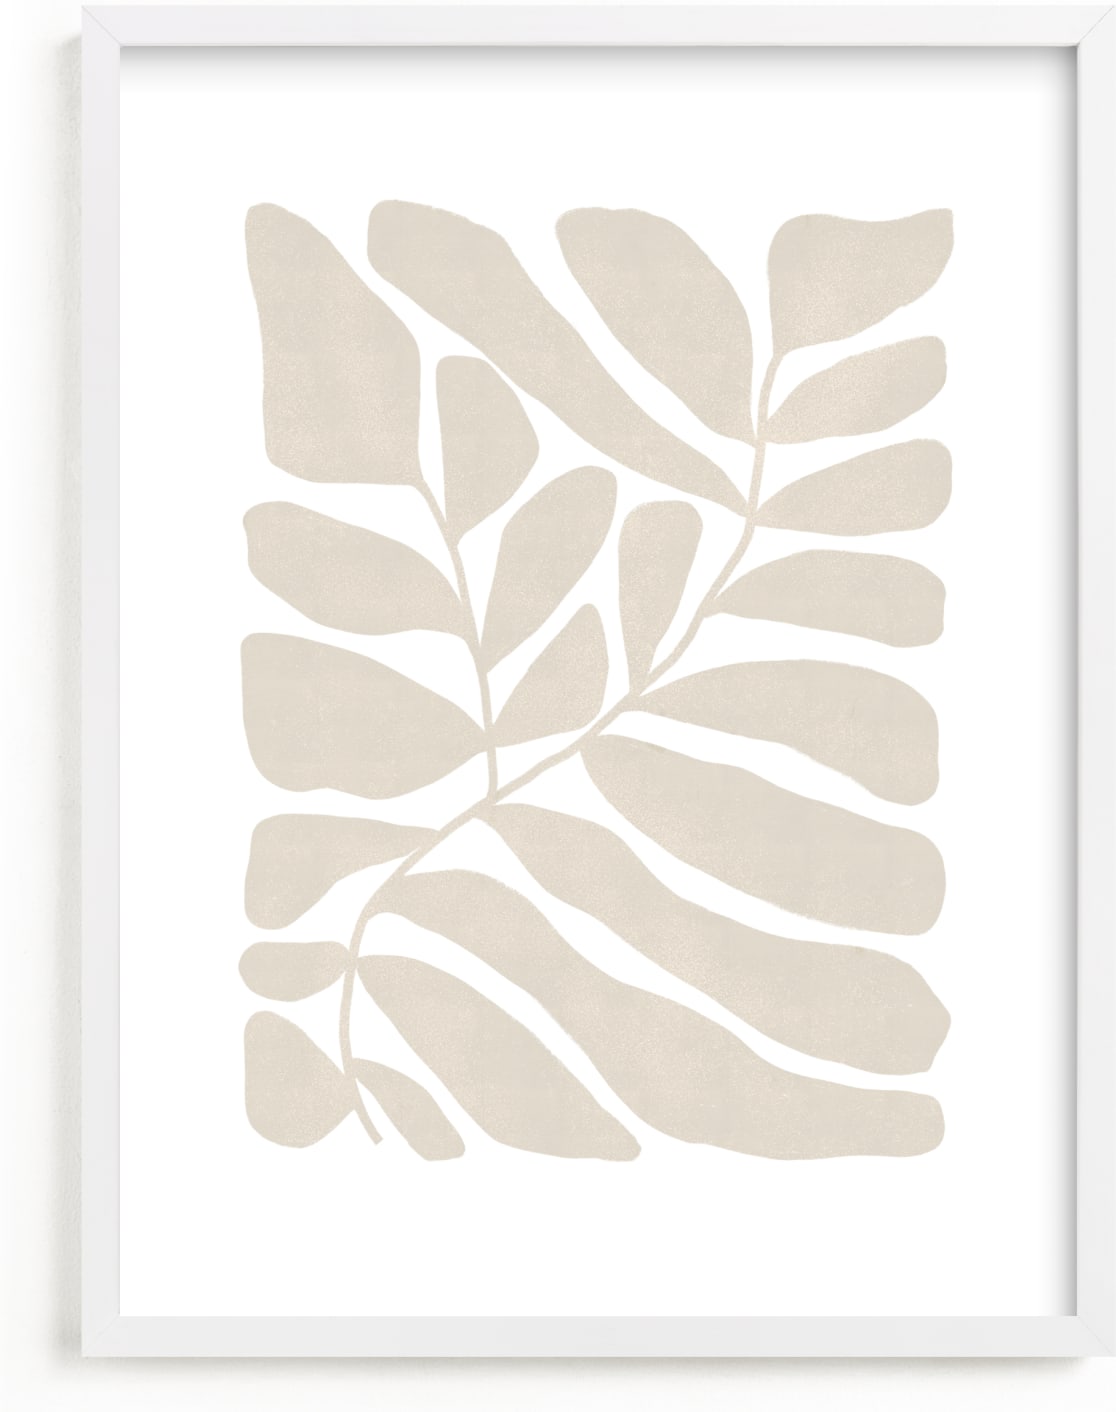 This is a ivory art by Kelly Ambrose called Loopy Leaves I.